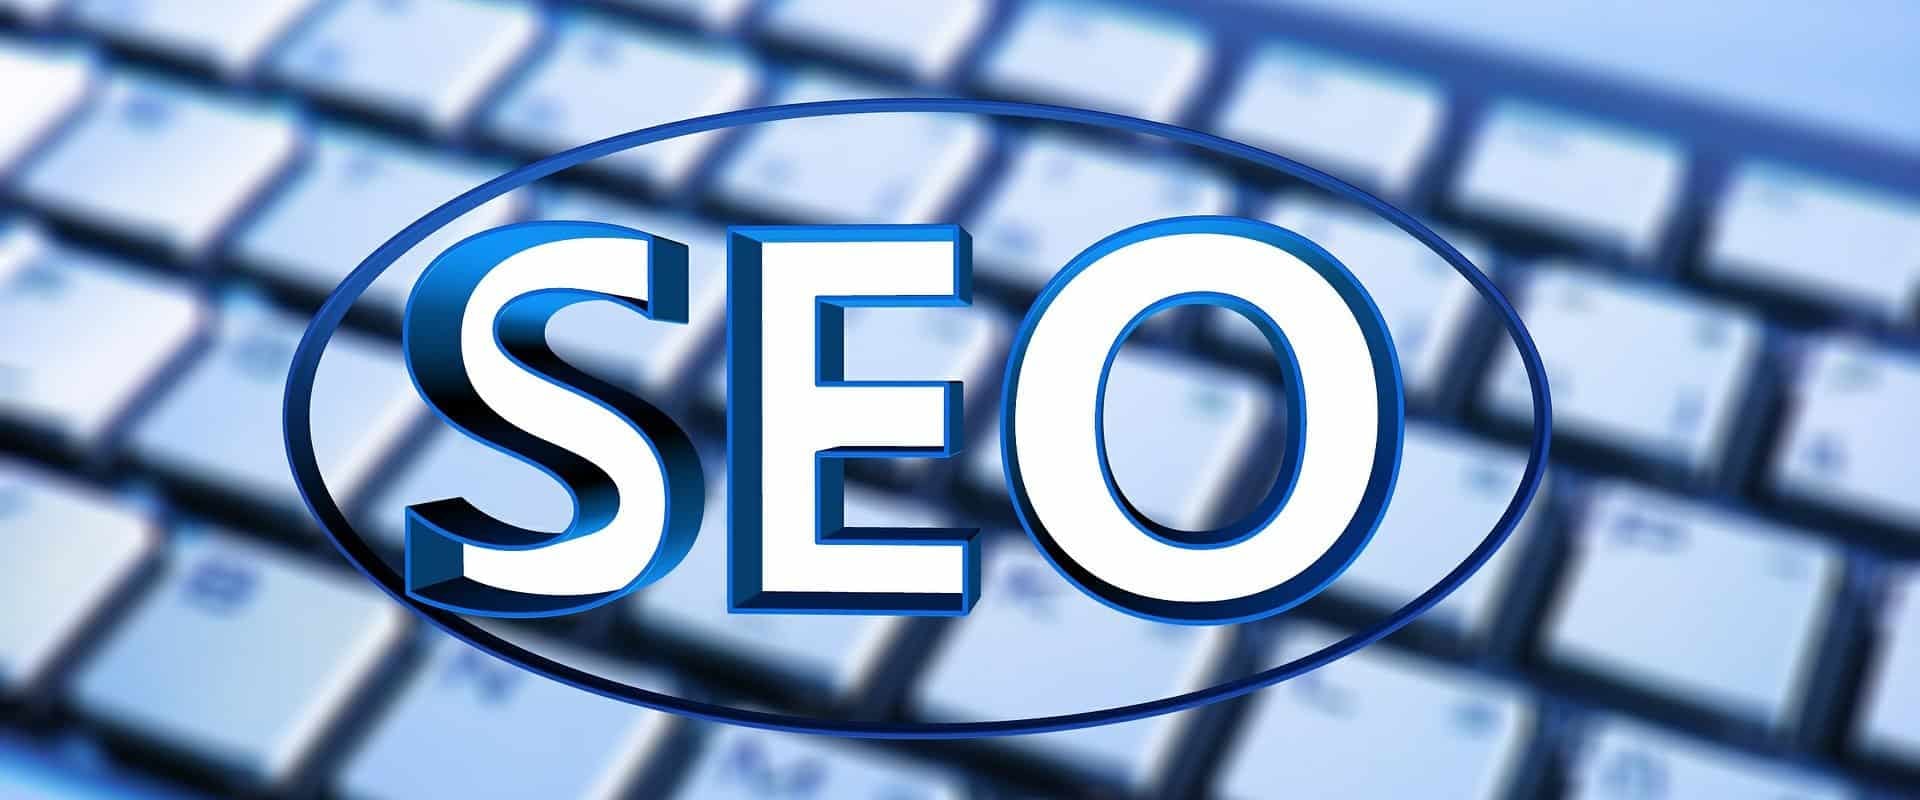 How do you optimize content for search engine optimization (seo) purposes?